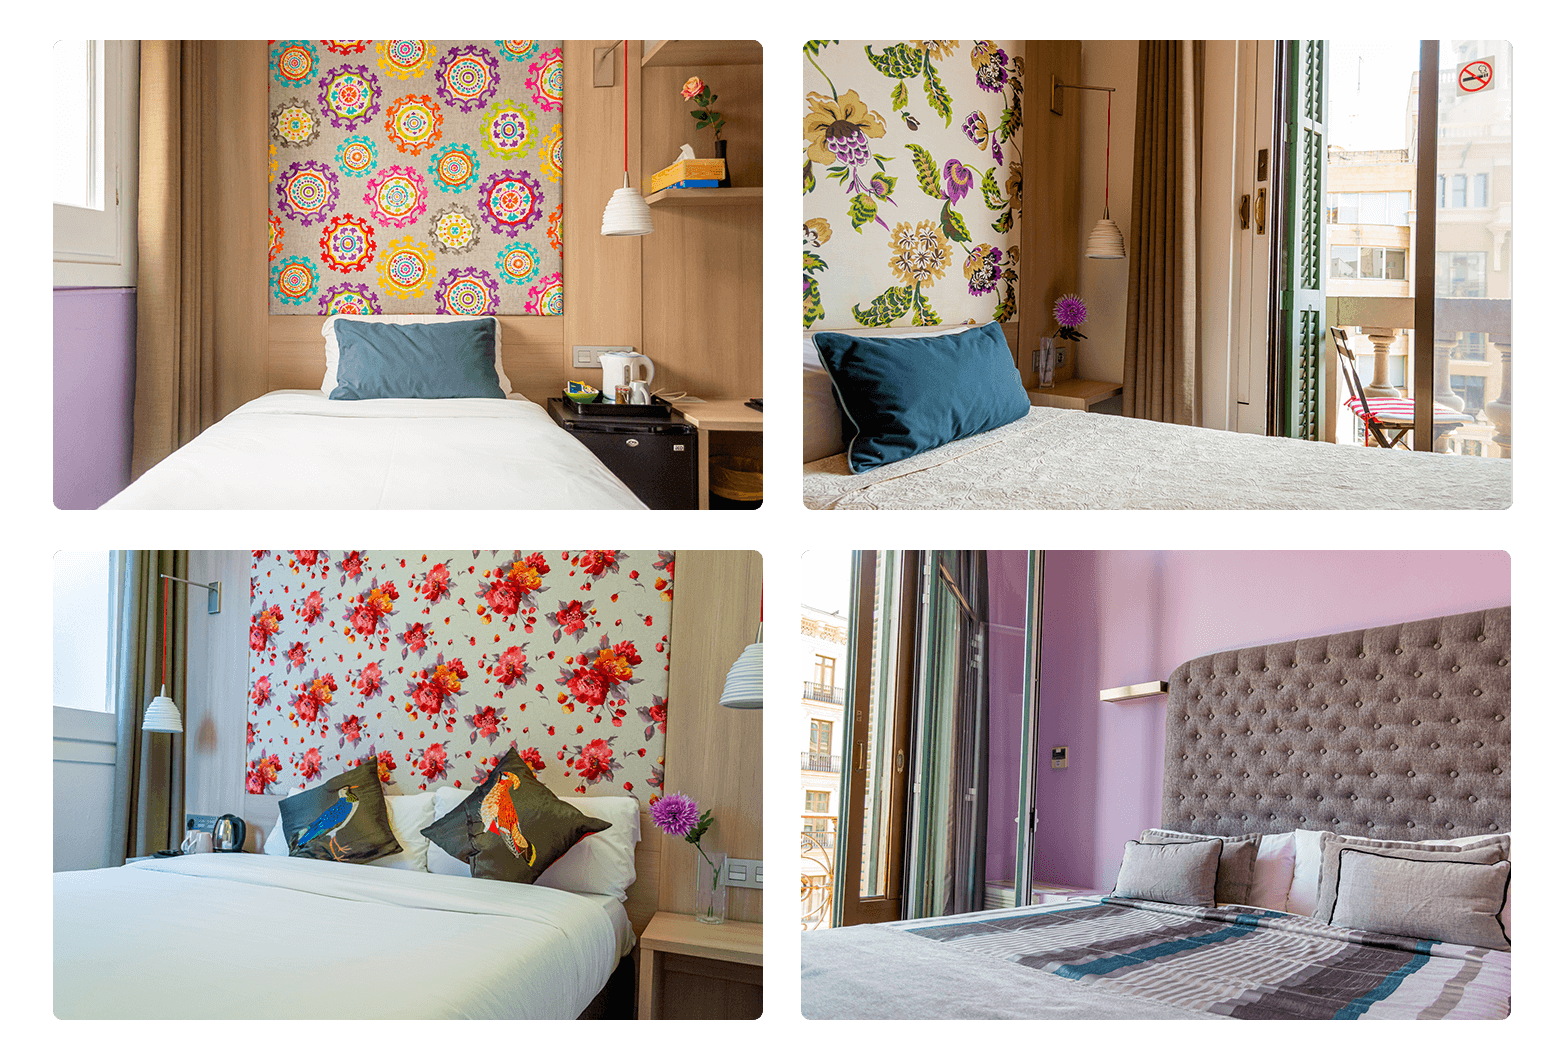 Photos of rooms offered at The Cardano Hotel, officially named Hotel Ginebra – the first business in the world to accept ADA.